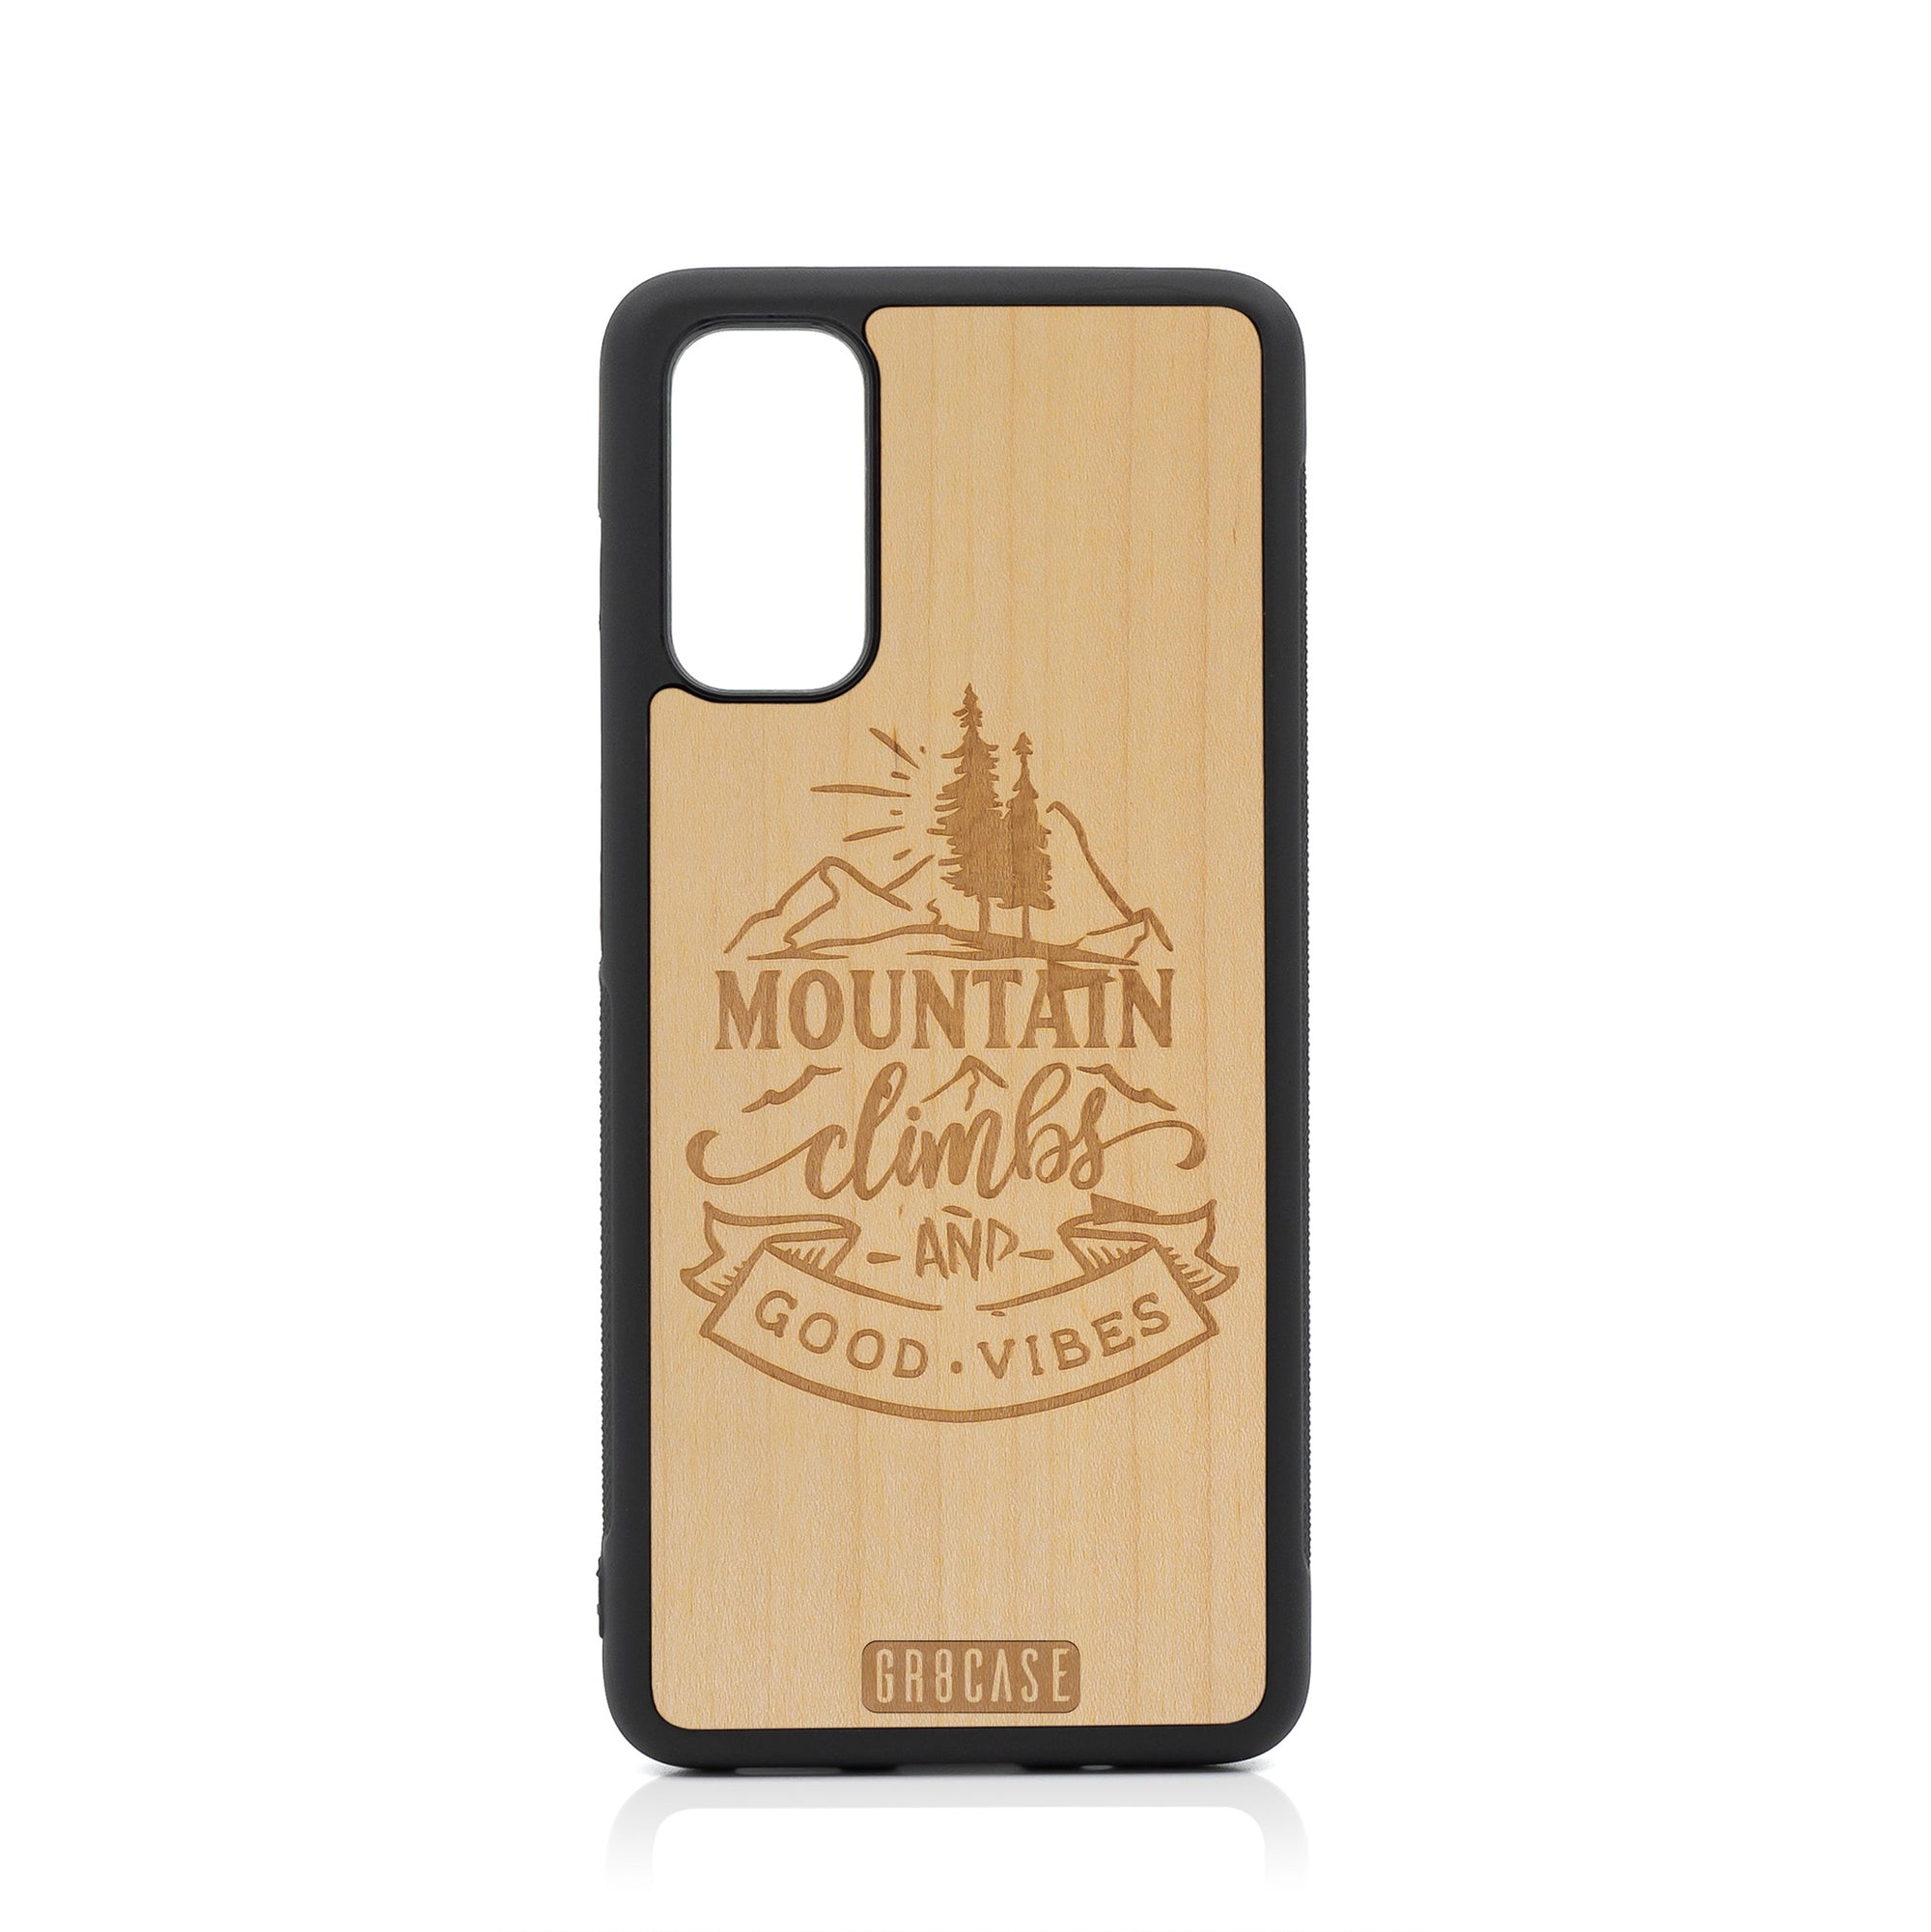 Mountain Climbs And Good Vibes Design Wood Case For Samsung Galaxy S20 by GR8CASE